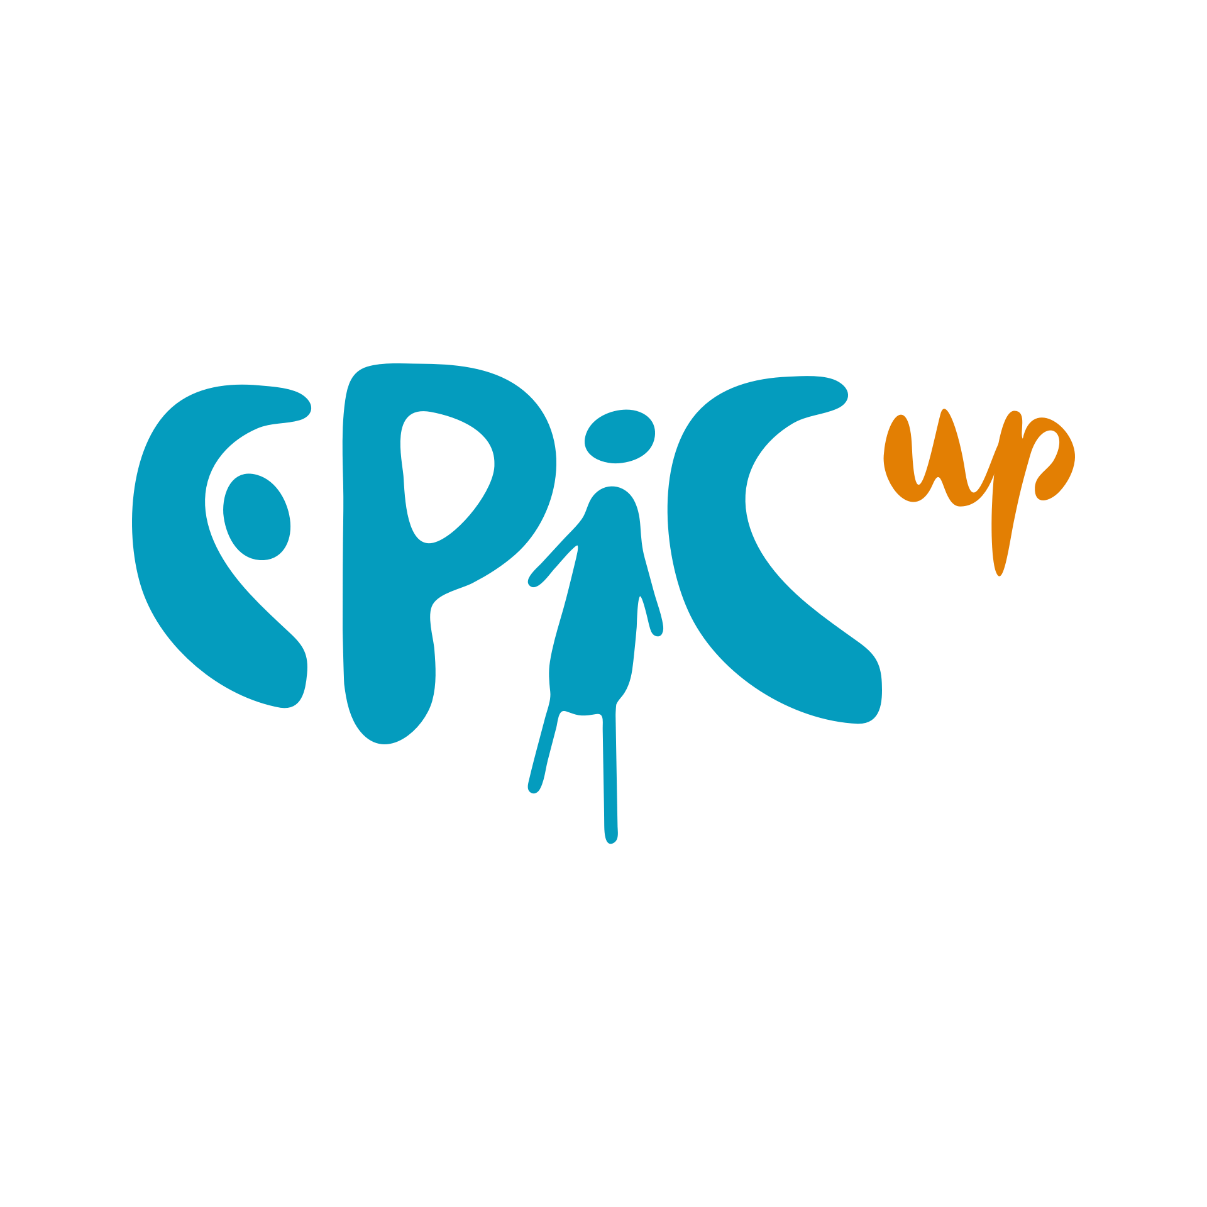 epic up